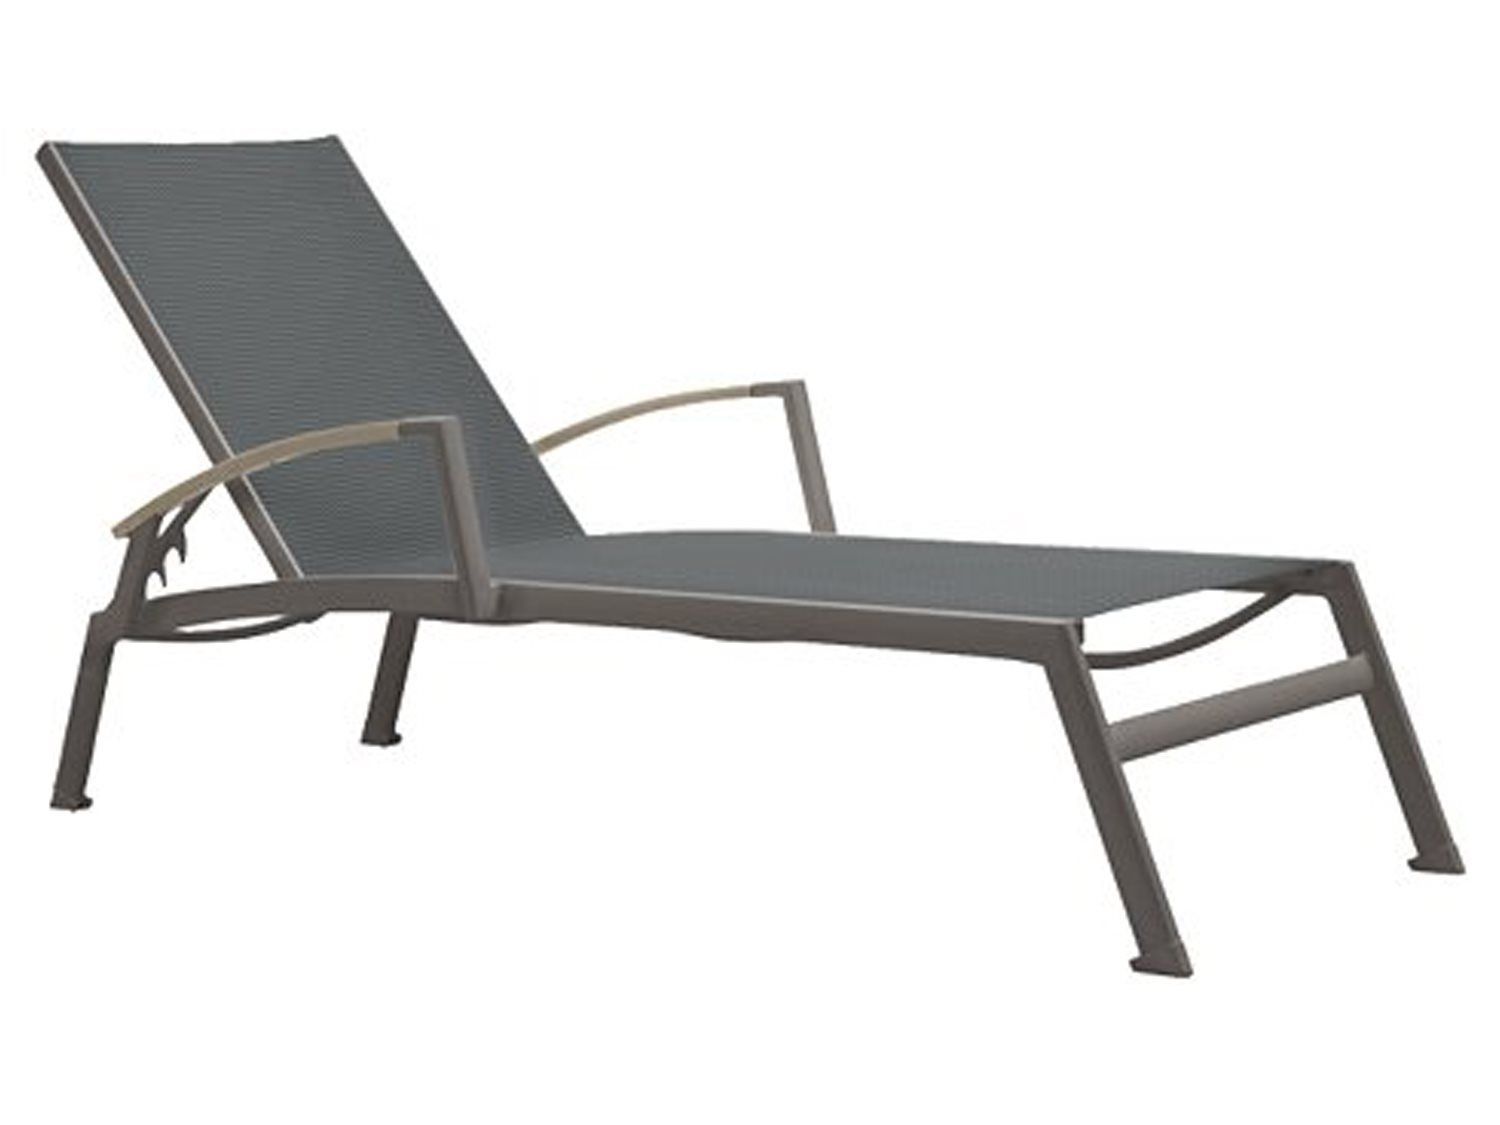 Aluminum Frame Adjustable Chaise With Arms And Sling Fabric Inside Steel Arm Outdoor Aluminum Chaise Sets (View 4 of 15)